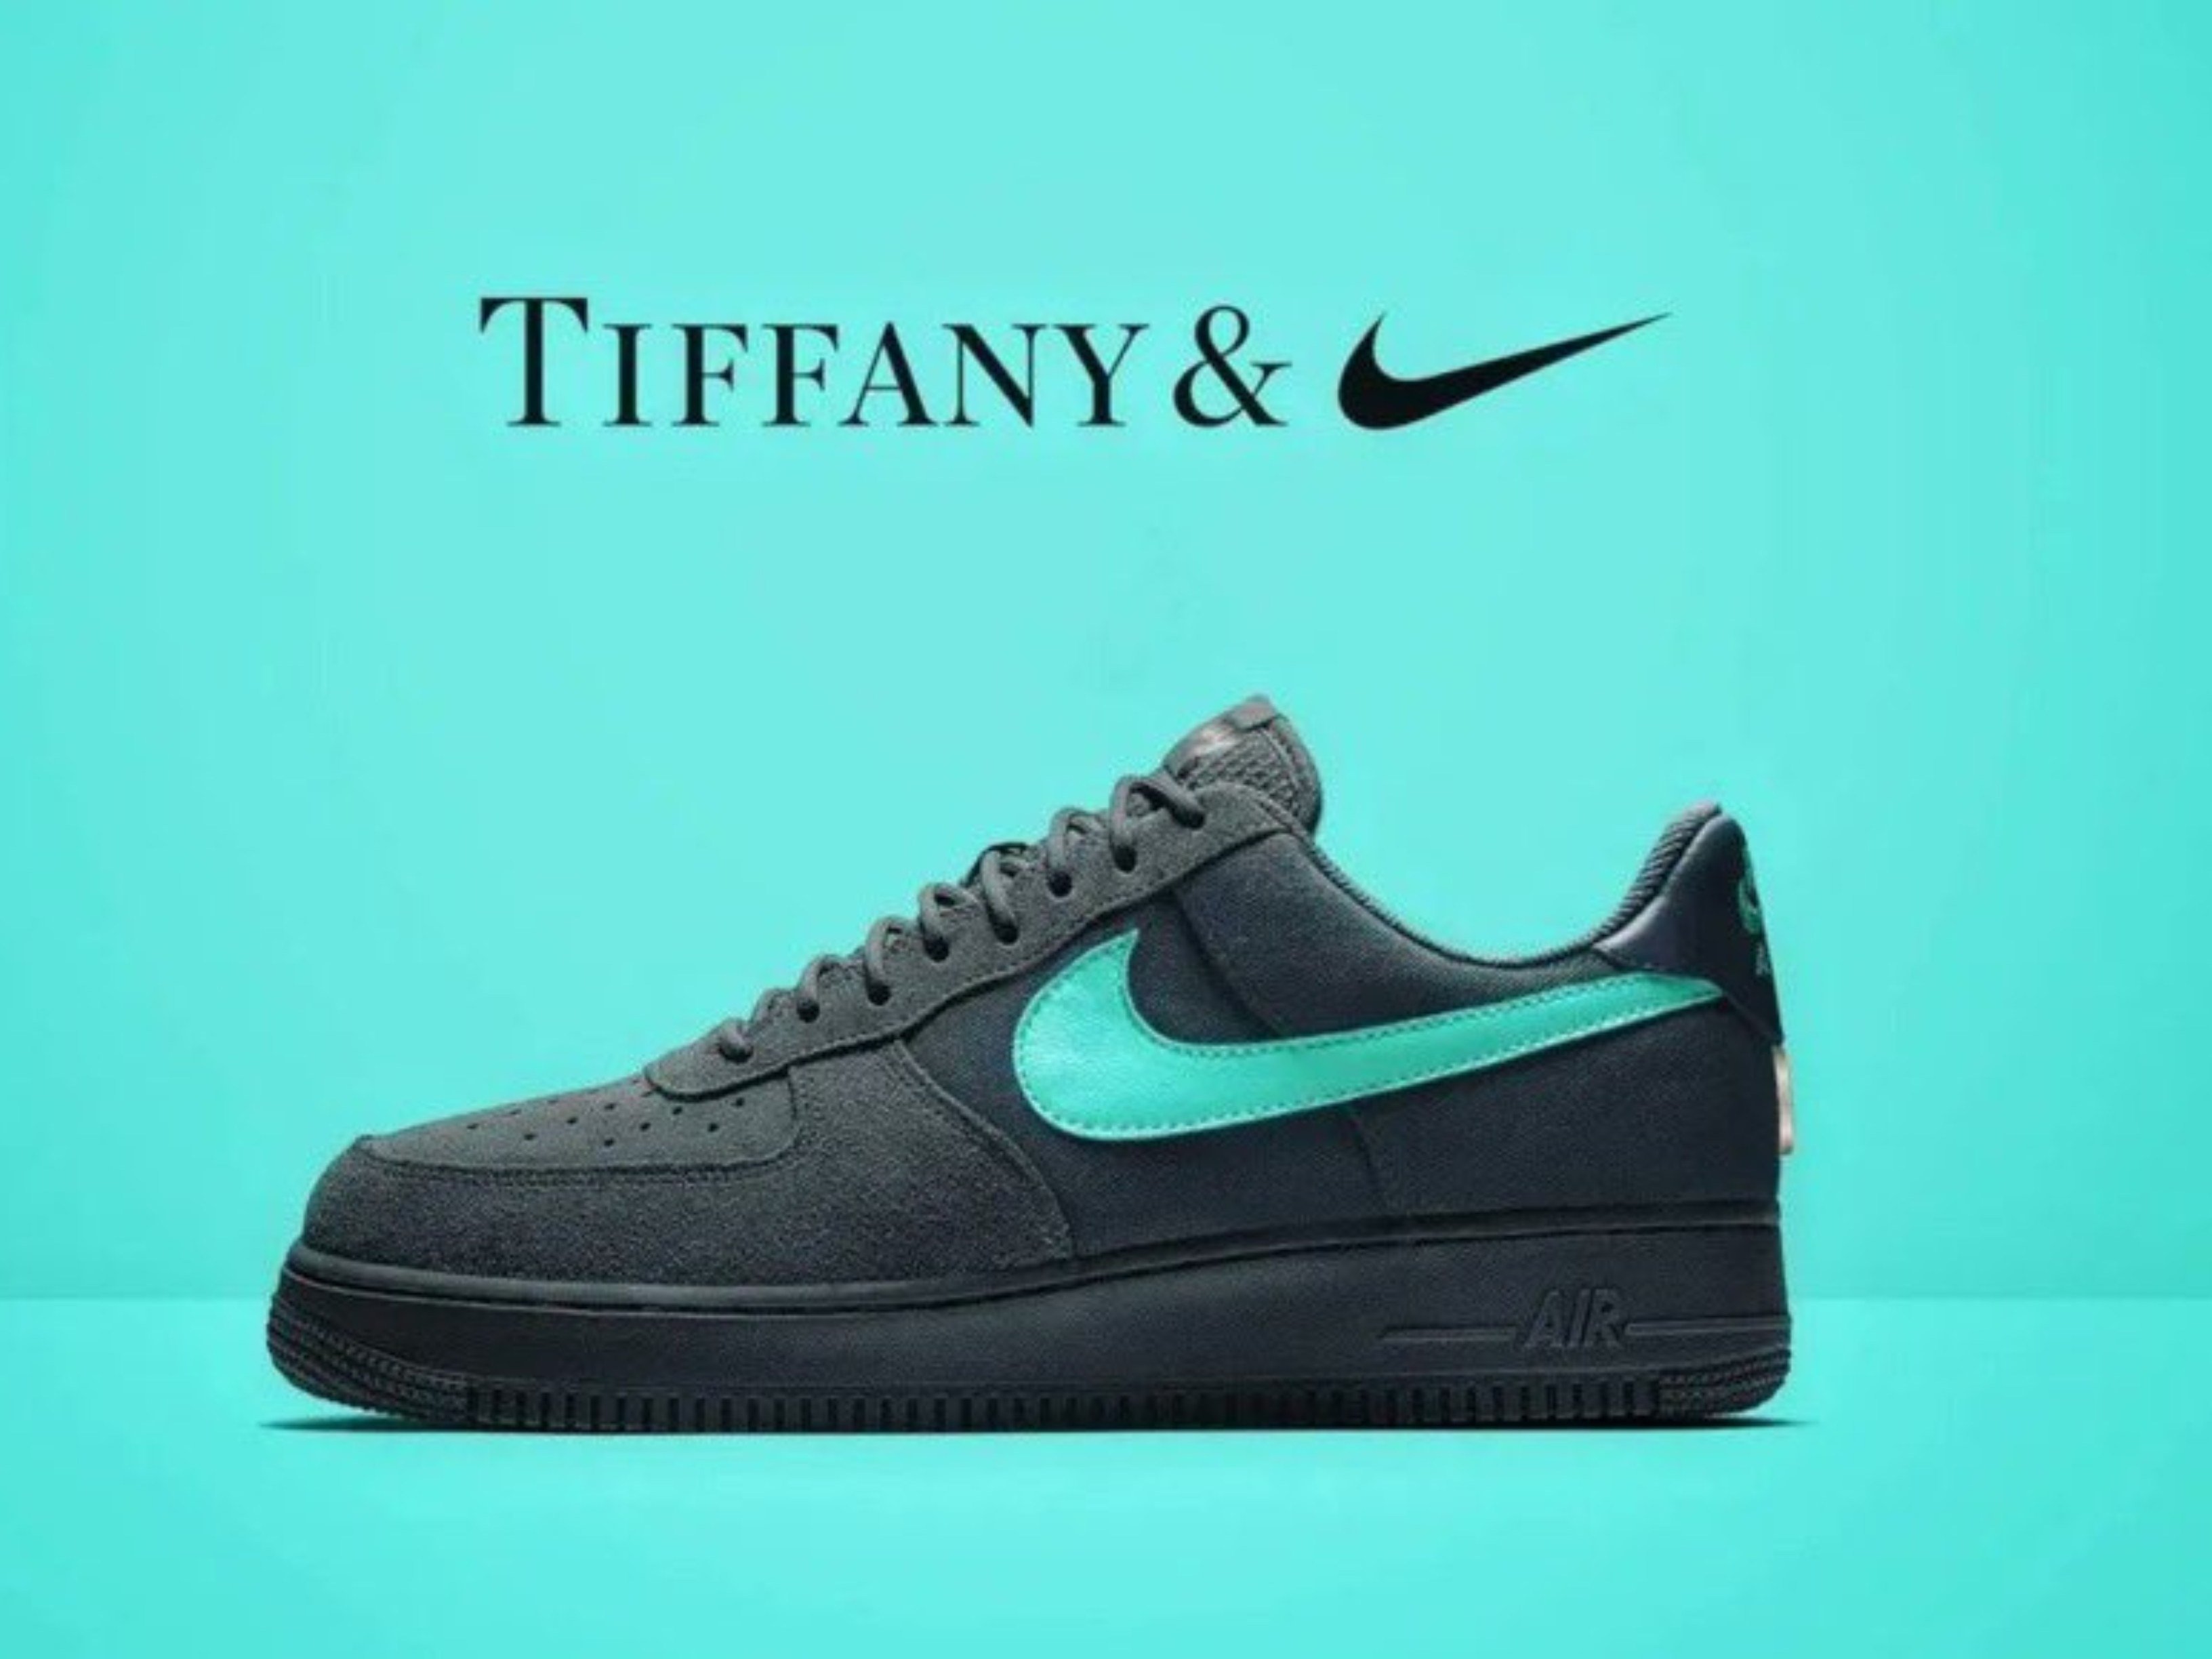 Nike And Tiffany & Co. To Launch Us$400 Sneakers: The Air Force 1 '1837'  Limited-Edition Shoe Collaboration Comes After The Lvmh Brand Worked With  Beyoncé And Jay-Z – But Some Are Calling